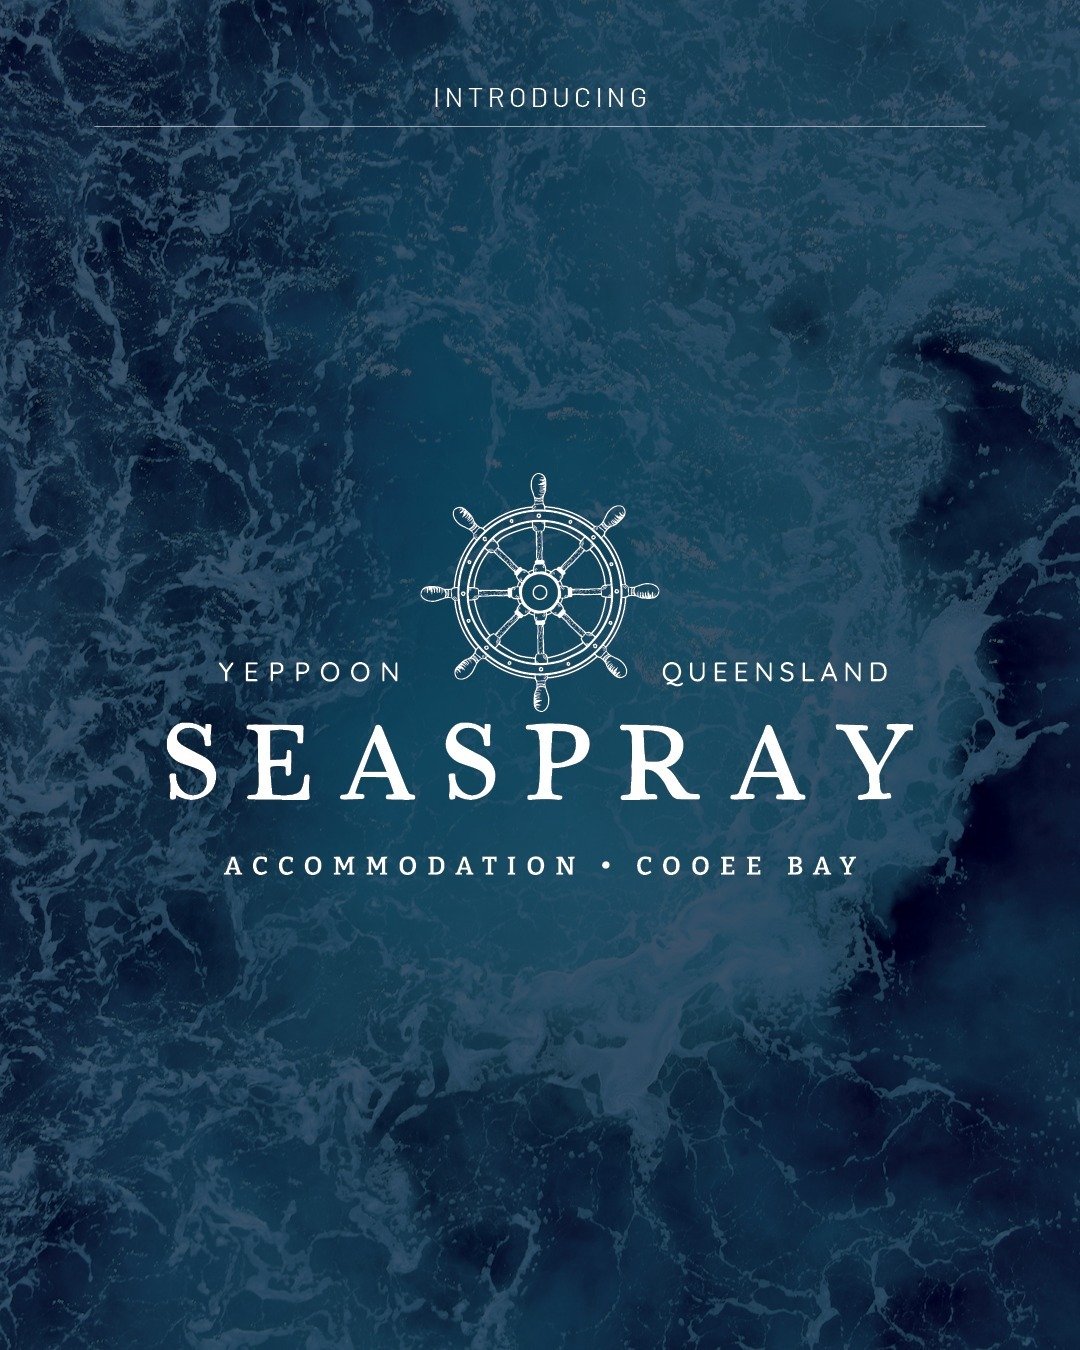 Introducing Seaspray Cooee Bay 

@seaspray_yeppoon is a haven of vintage charm for seafarers and travellers to escape for playful adventures by the sea.

We worked with Claire to create a new brand that reflected their newly aqquired beachside accomm